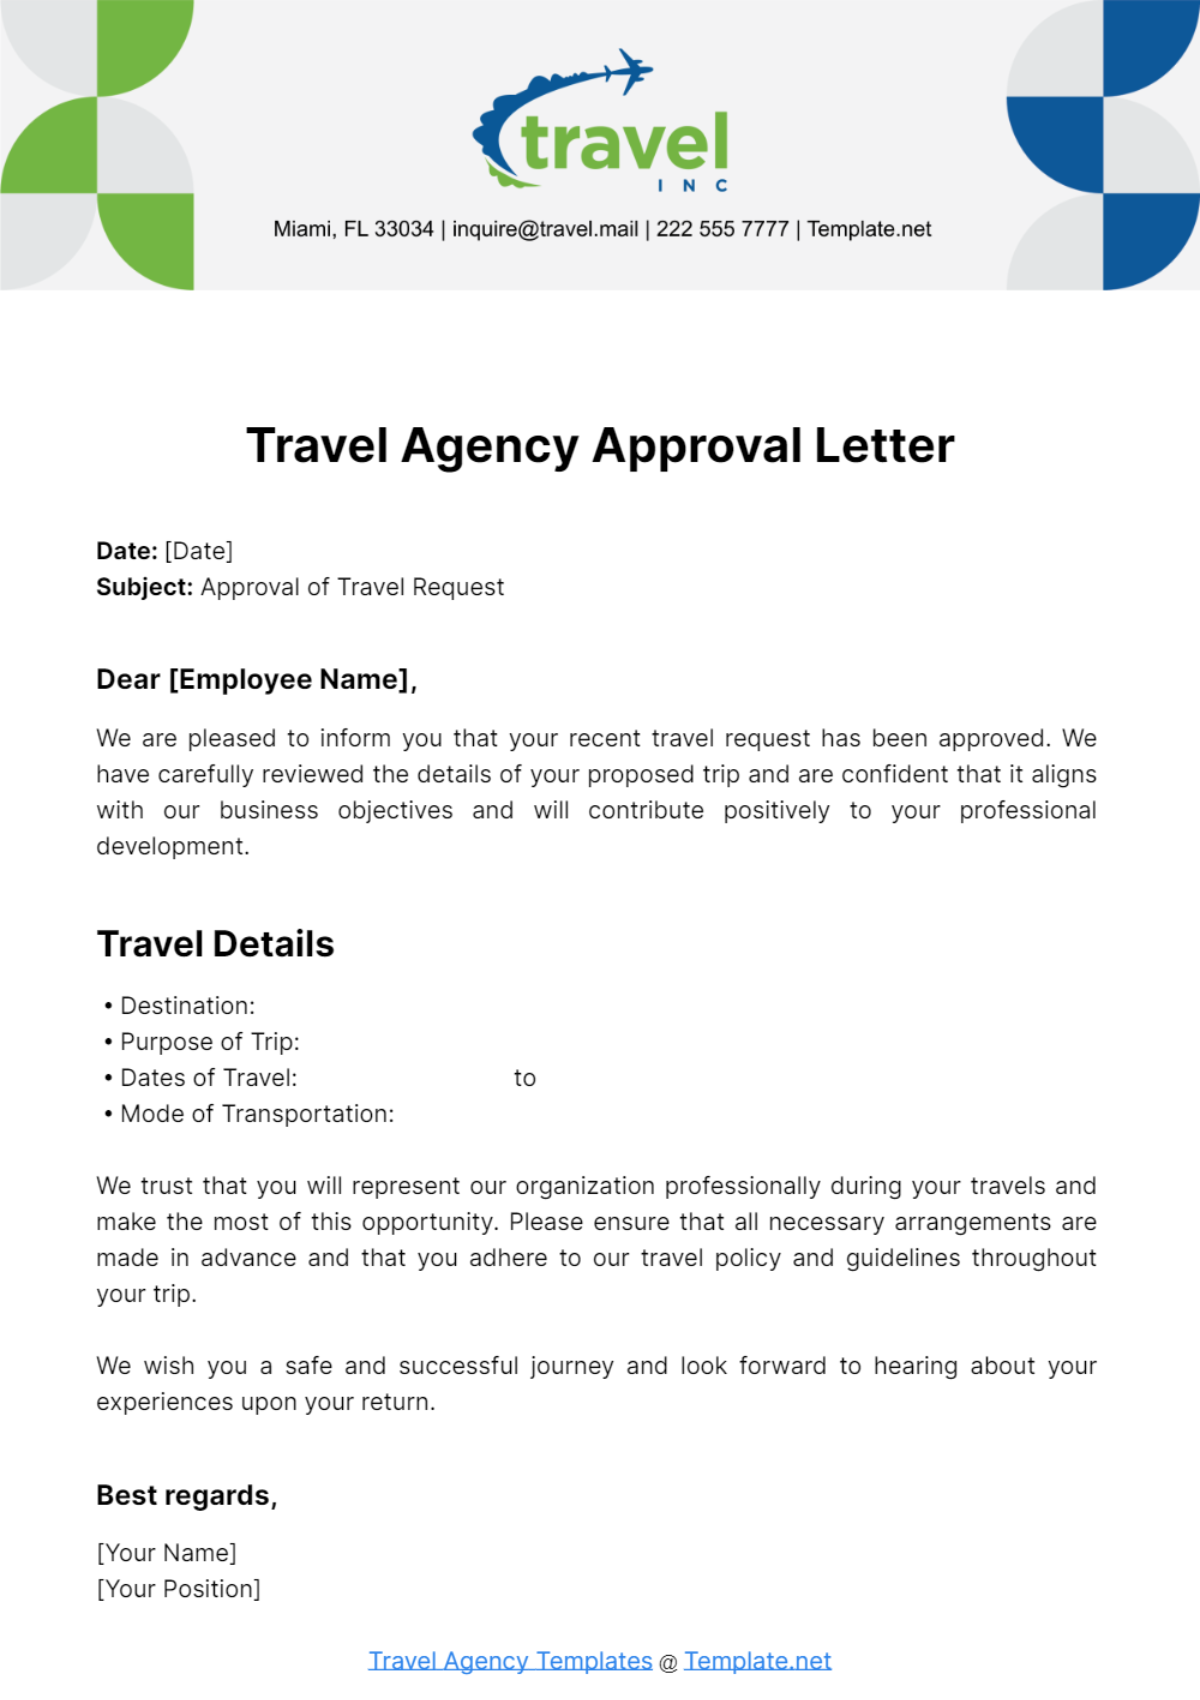 Travel Agency Approval Letter Template